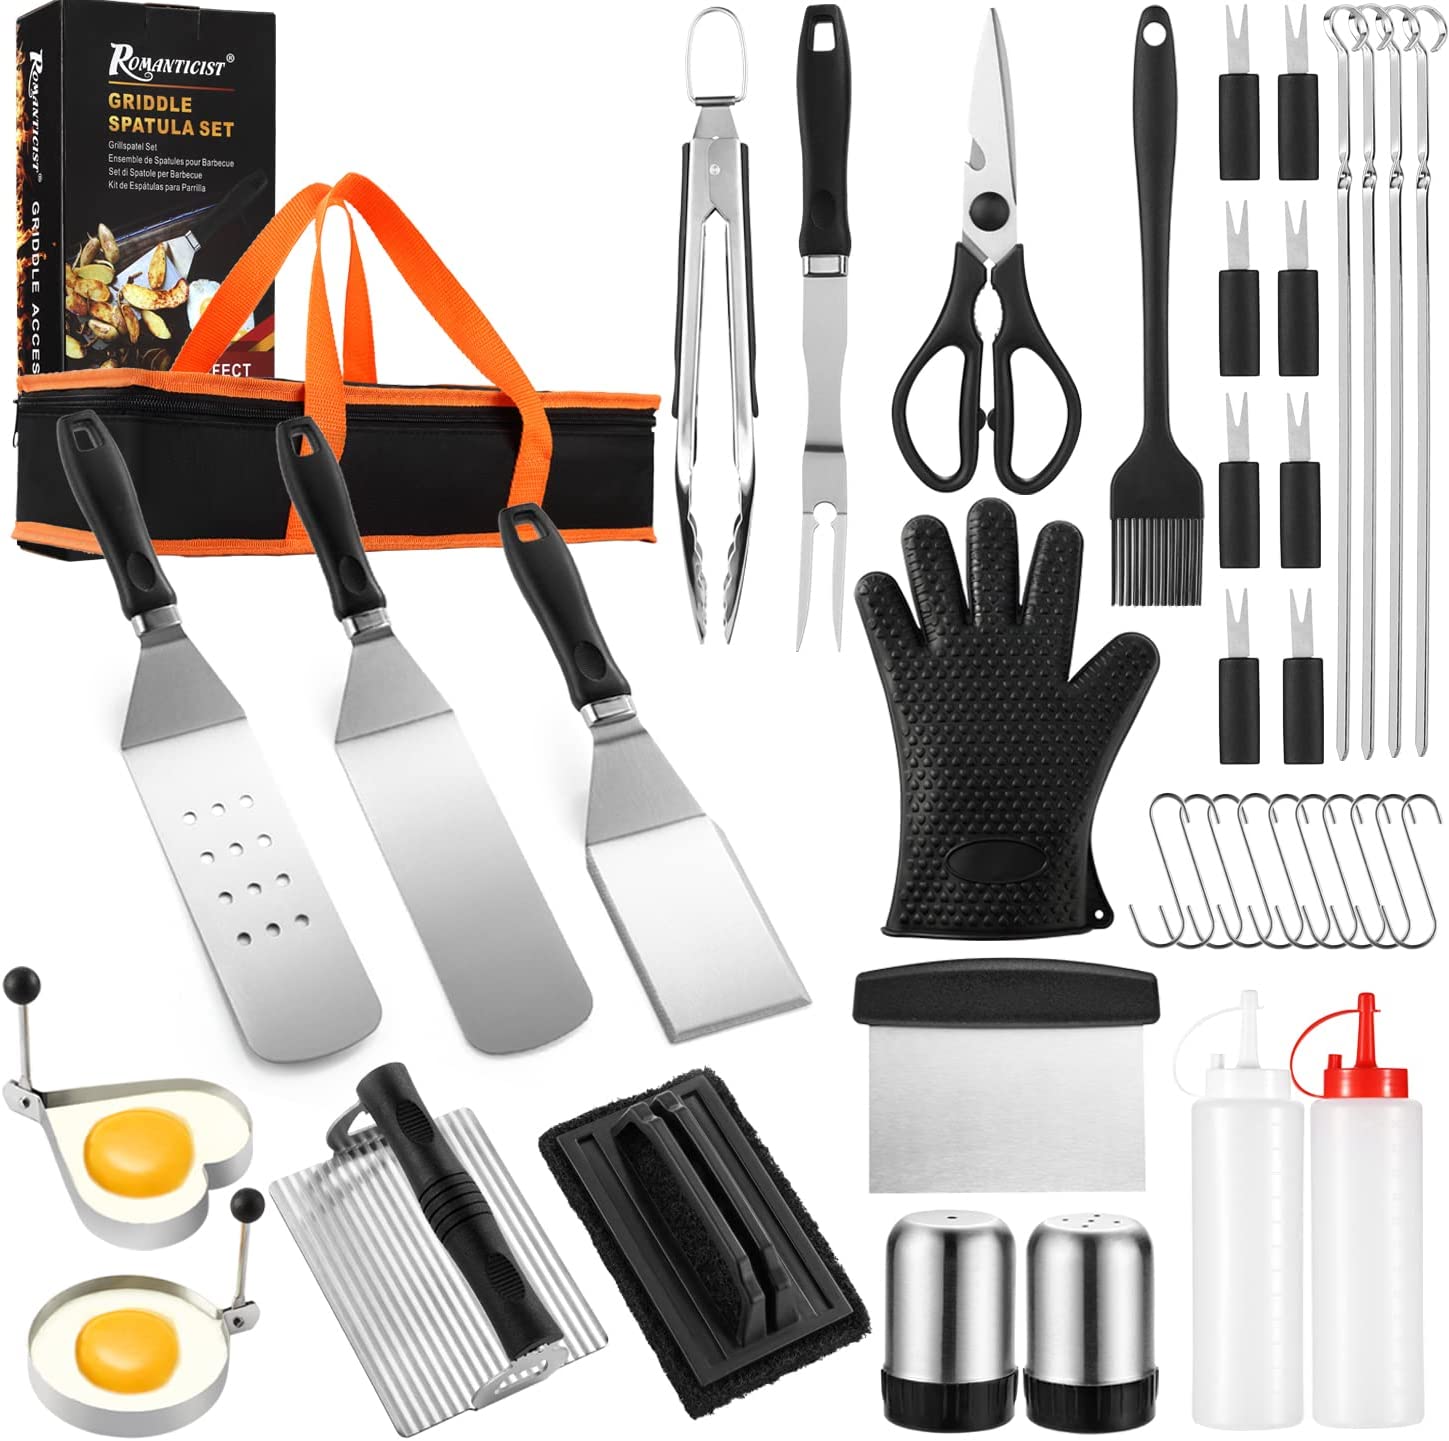 71JhhBStoxL. AC SL1500  - Griddle Accessories Tool-40pcs Flat Top Griddle Set,Stainless Steel Griddle Utensils with Spatulas,Tongs,Fork,Glove,Burger Press,Cleaning Brush.